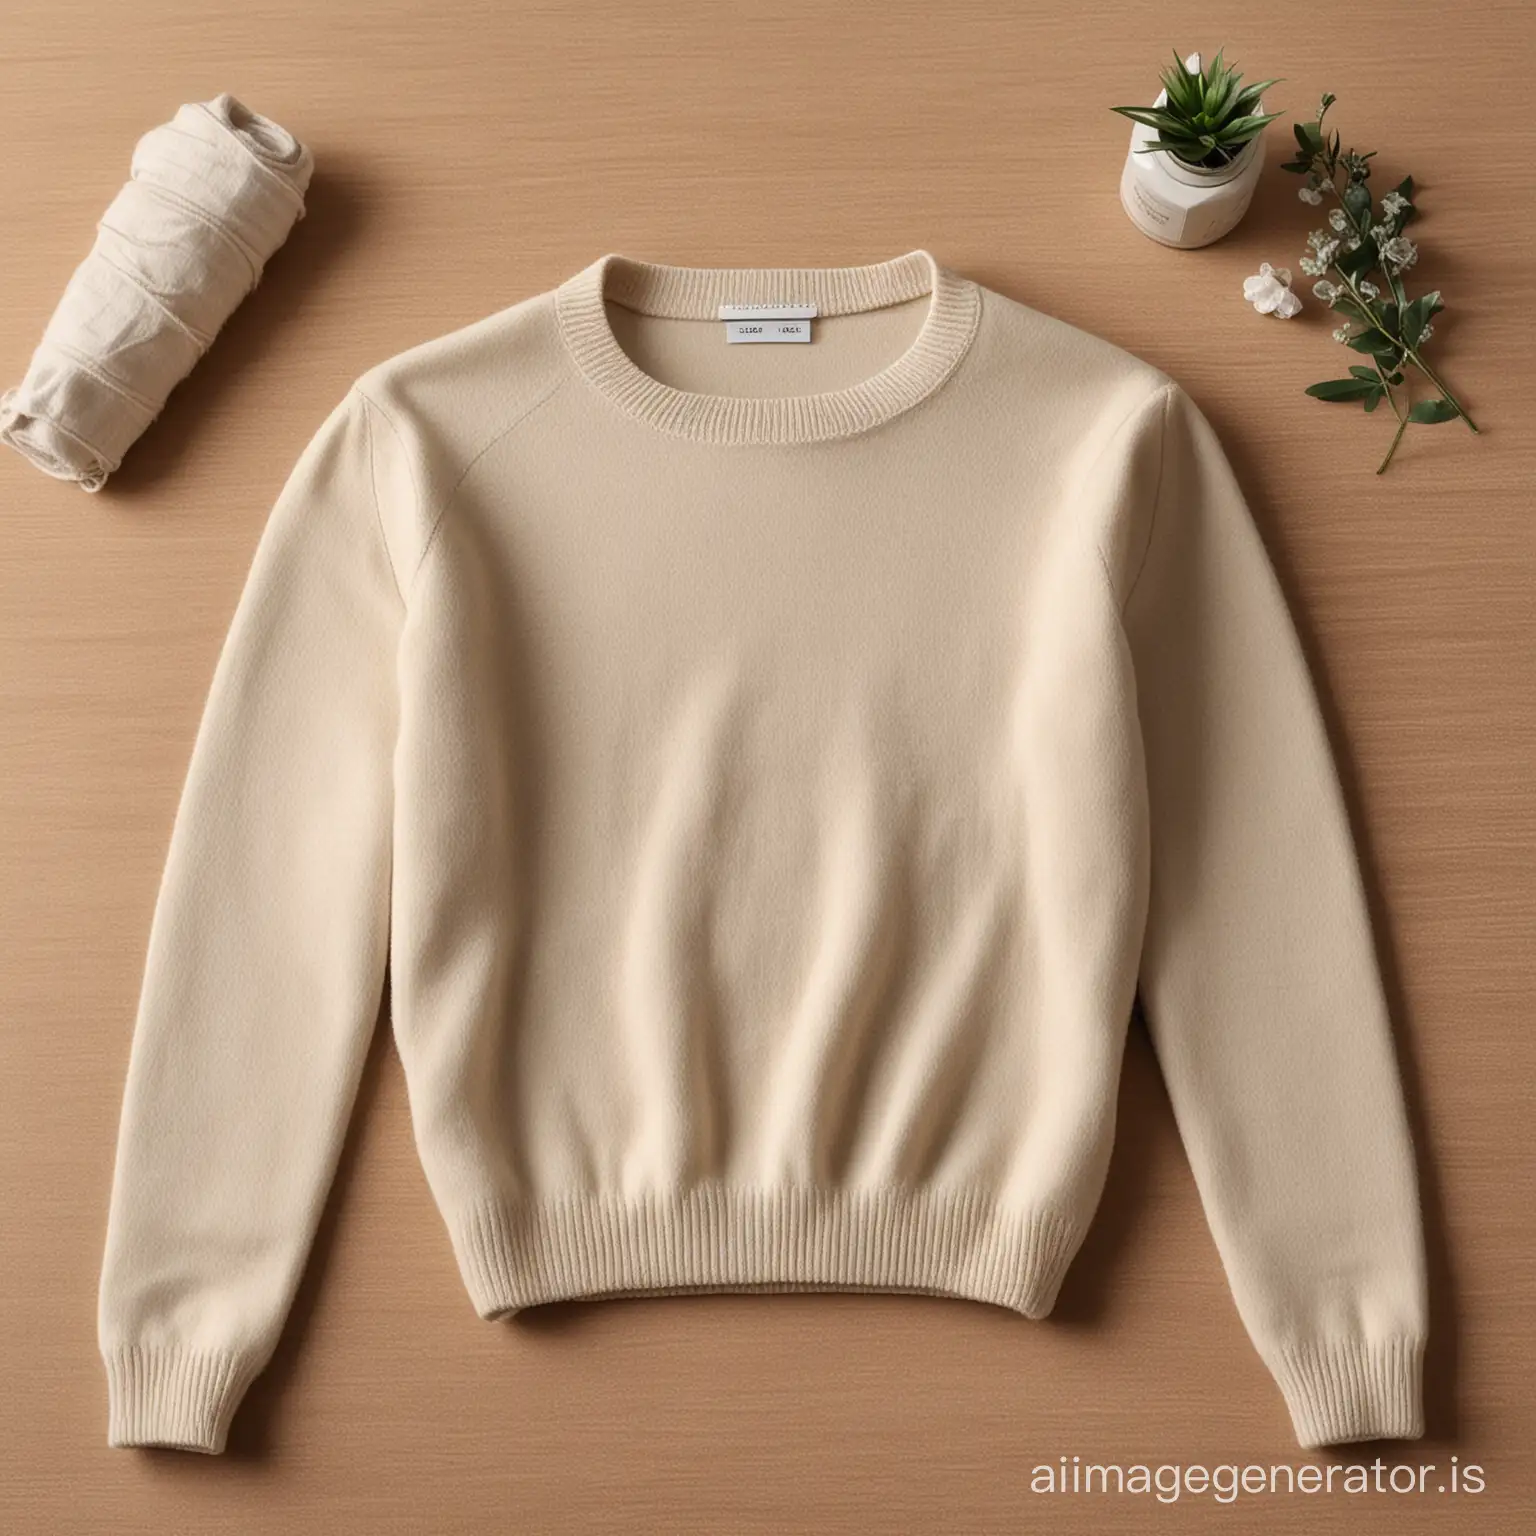 a sweater as a sales advertisement, which serves as a sales image without people, without faces, no one is wearing it, it's lying on the table